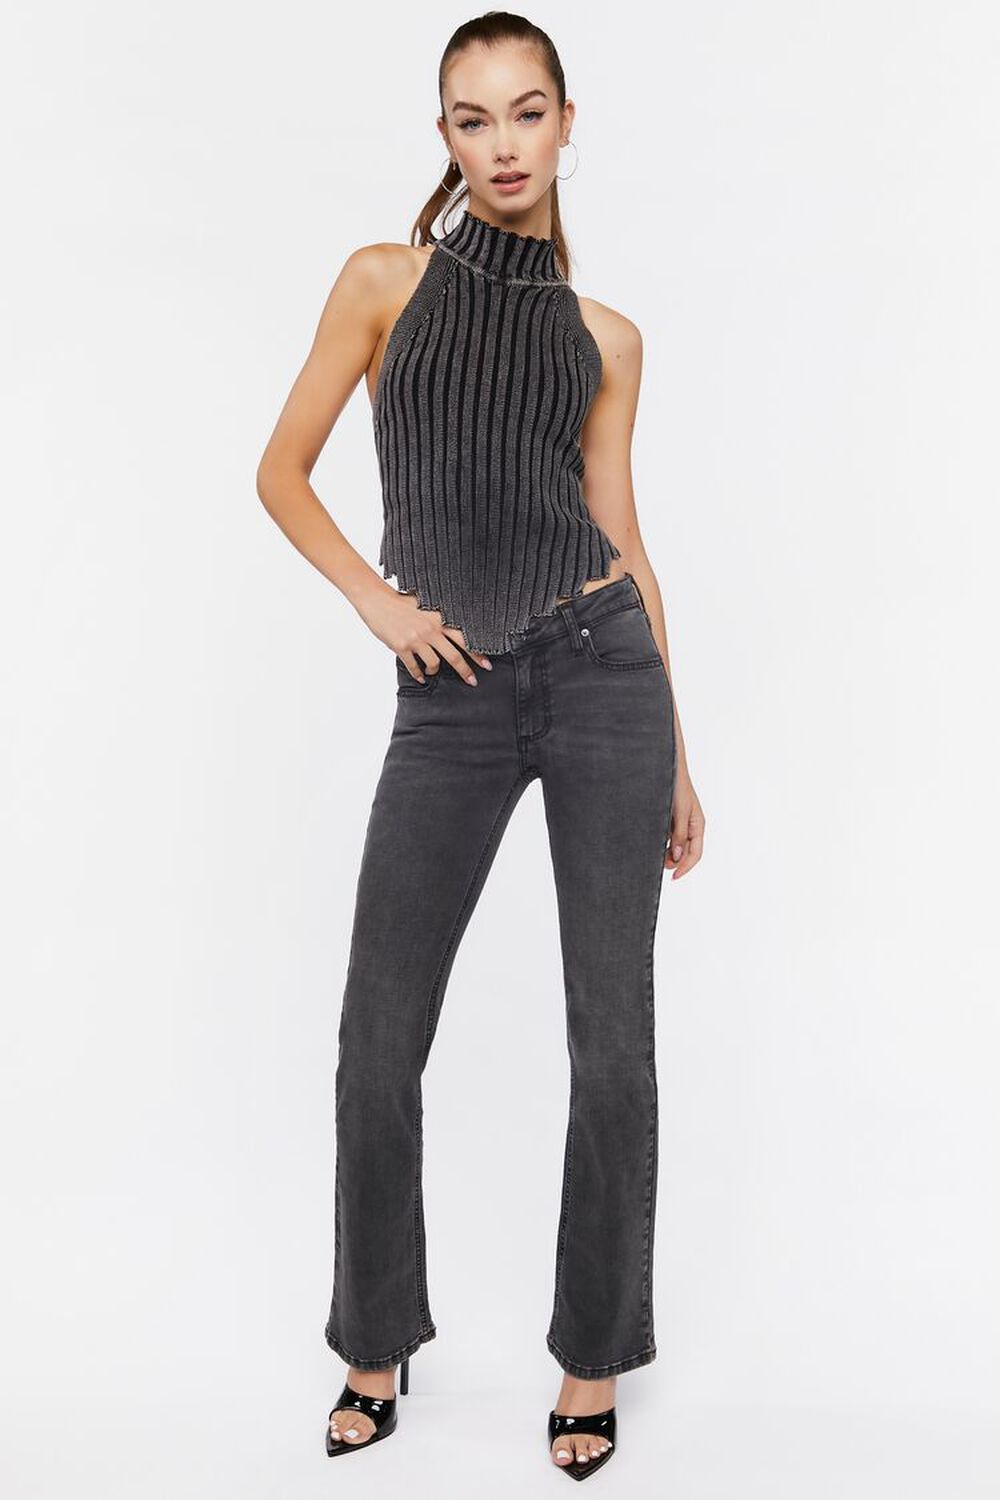 WASHED BLACK Low-Rise Bootcut Jeans, image 1